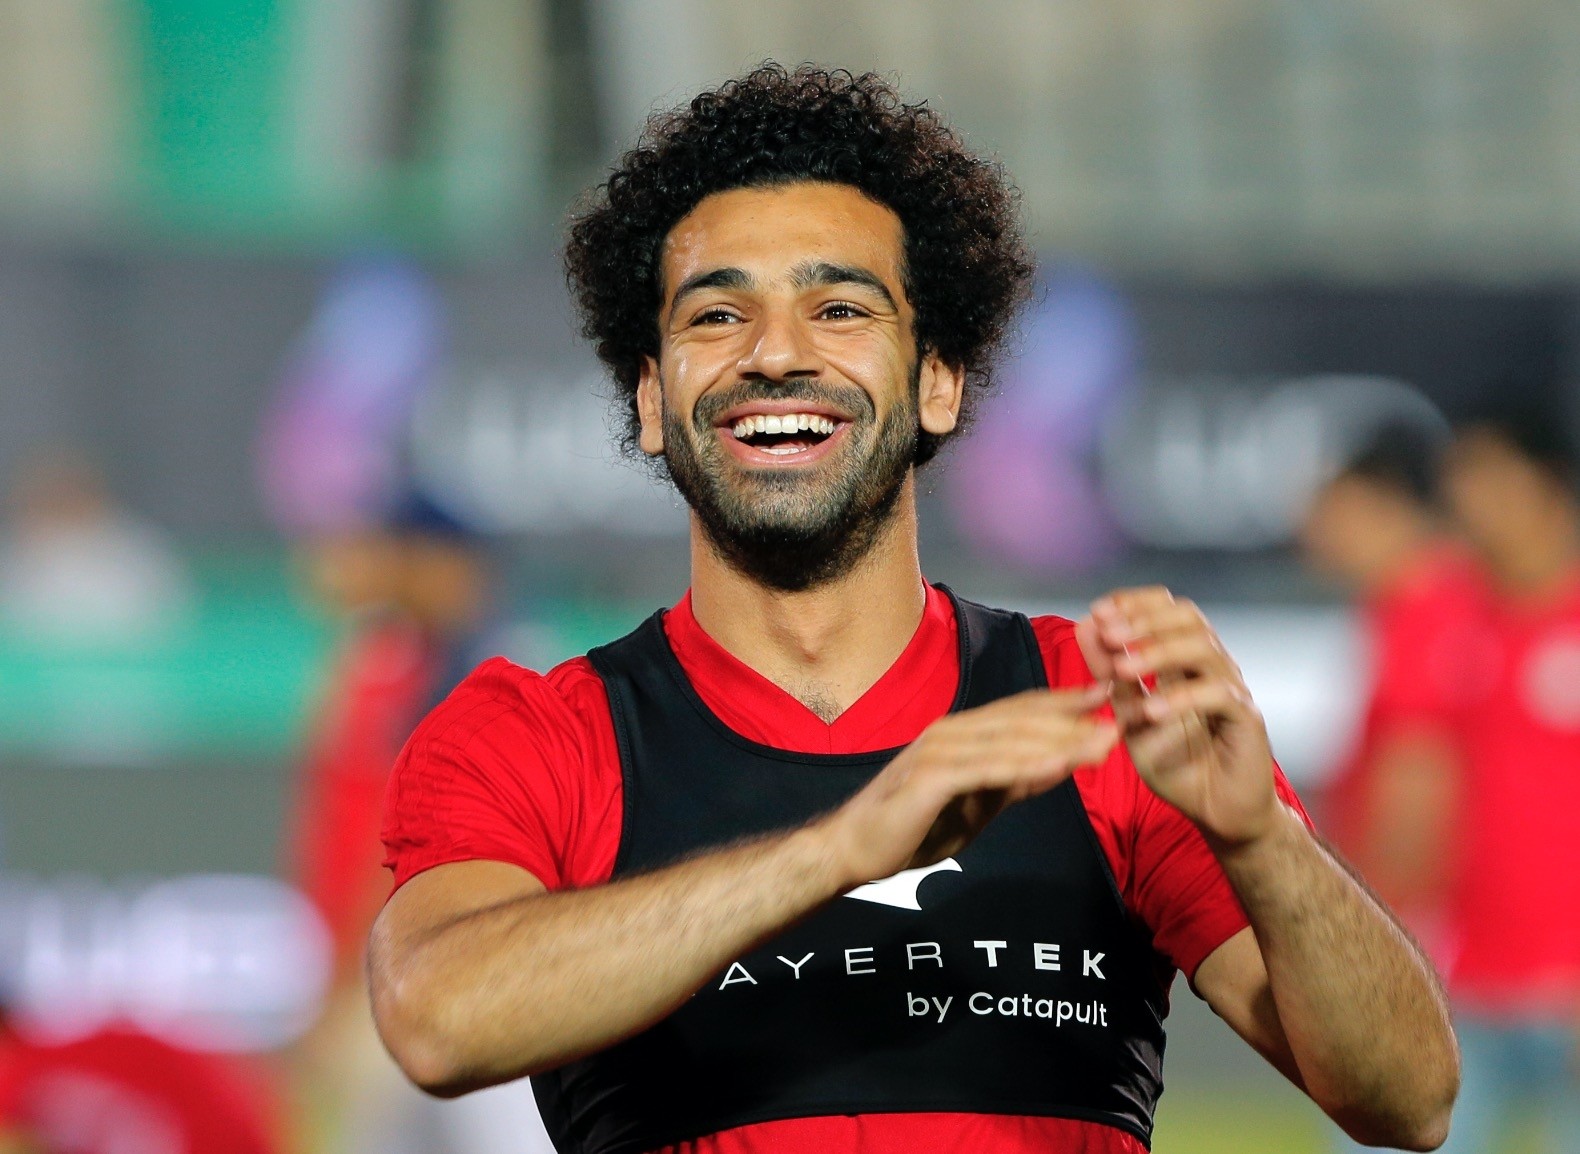 Egyptian national team player and Liverpoolu2019s star striker Mohammed Salah smiles as he greets fans during the final training of the national team at Cairo Stadium June 9.